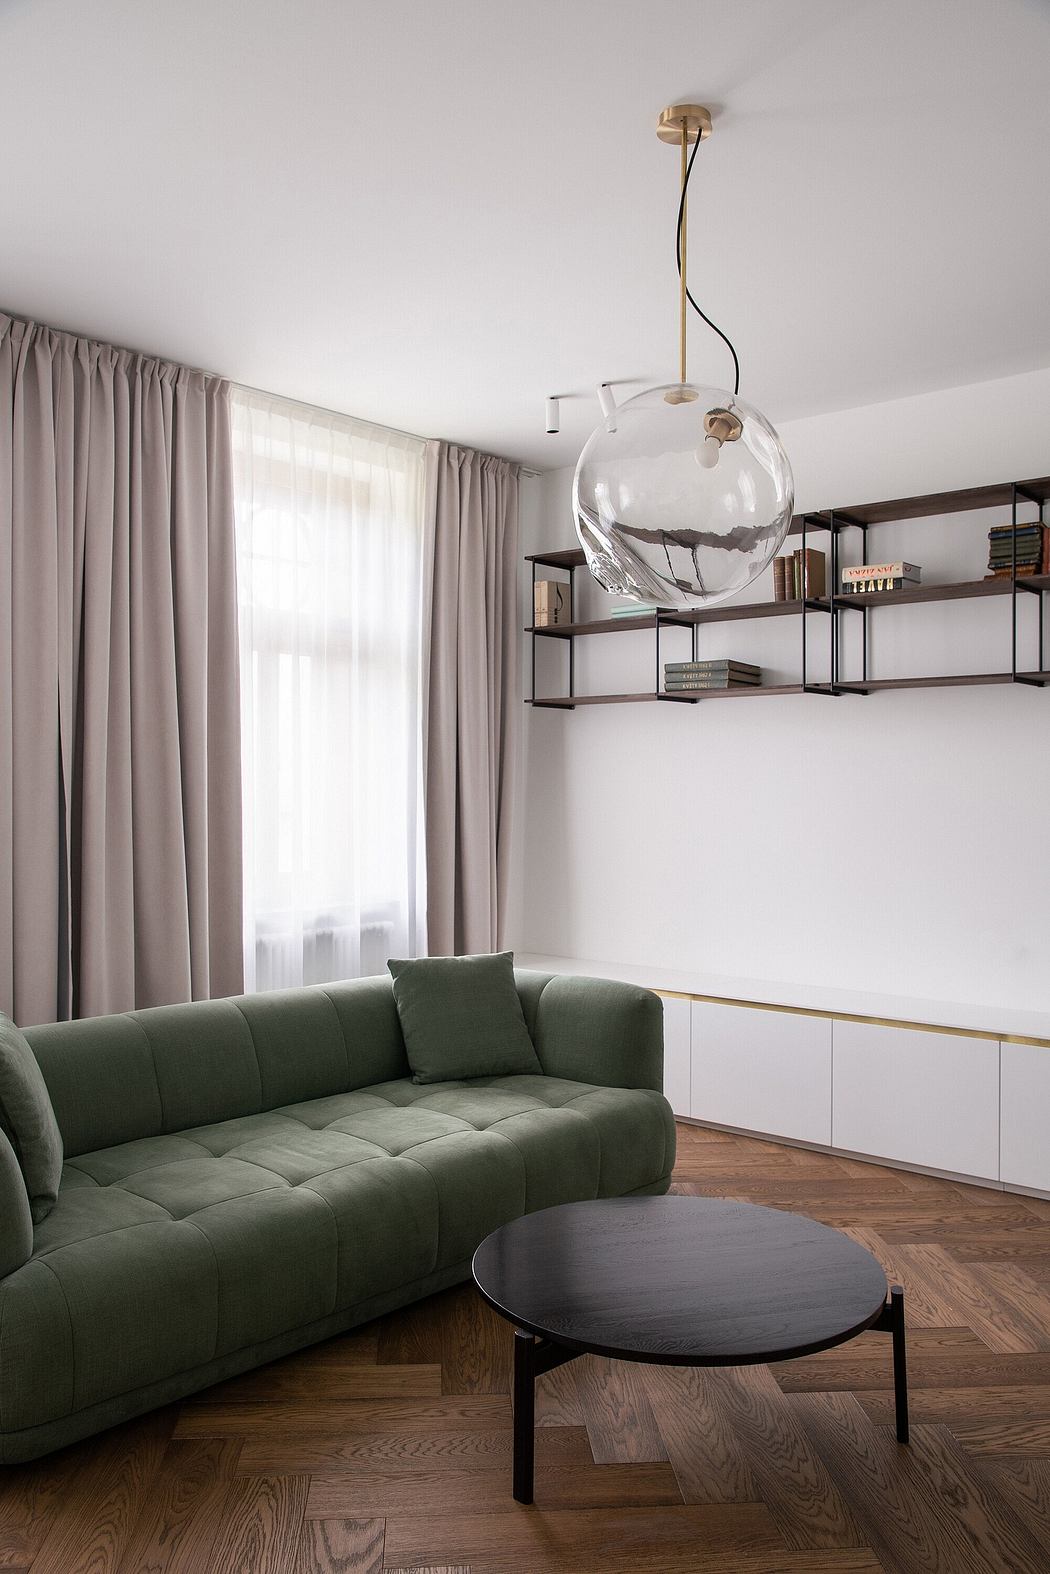 Villa Bianca Apartment: A Fusion of Old and New in Prague